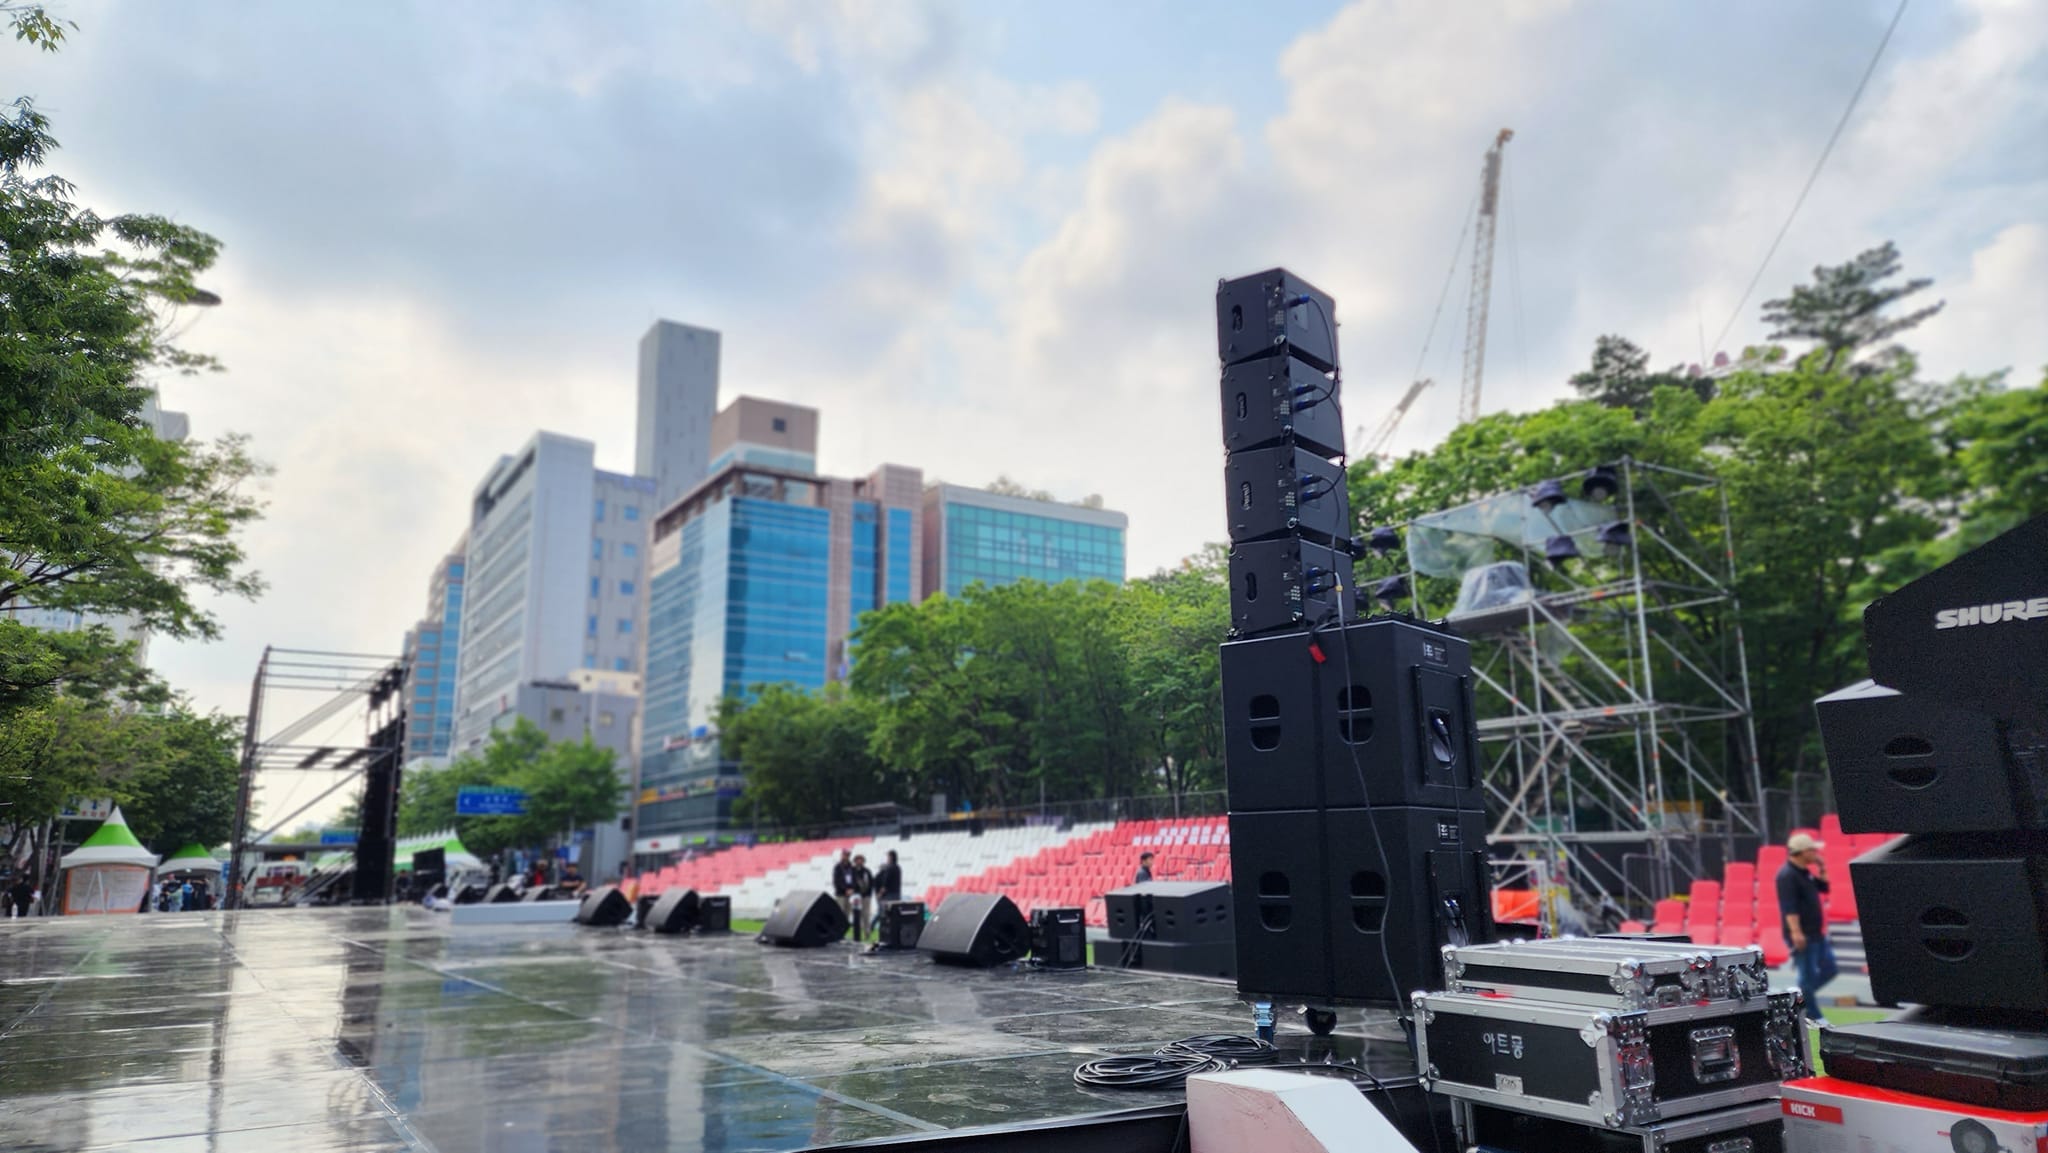 ZSOUND's audio systems took center stage at the Daegu Power Festival in South Korea